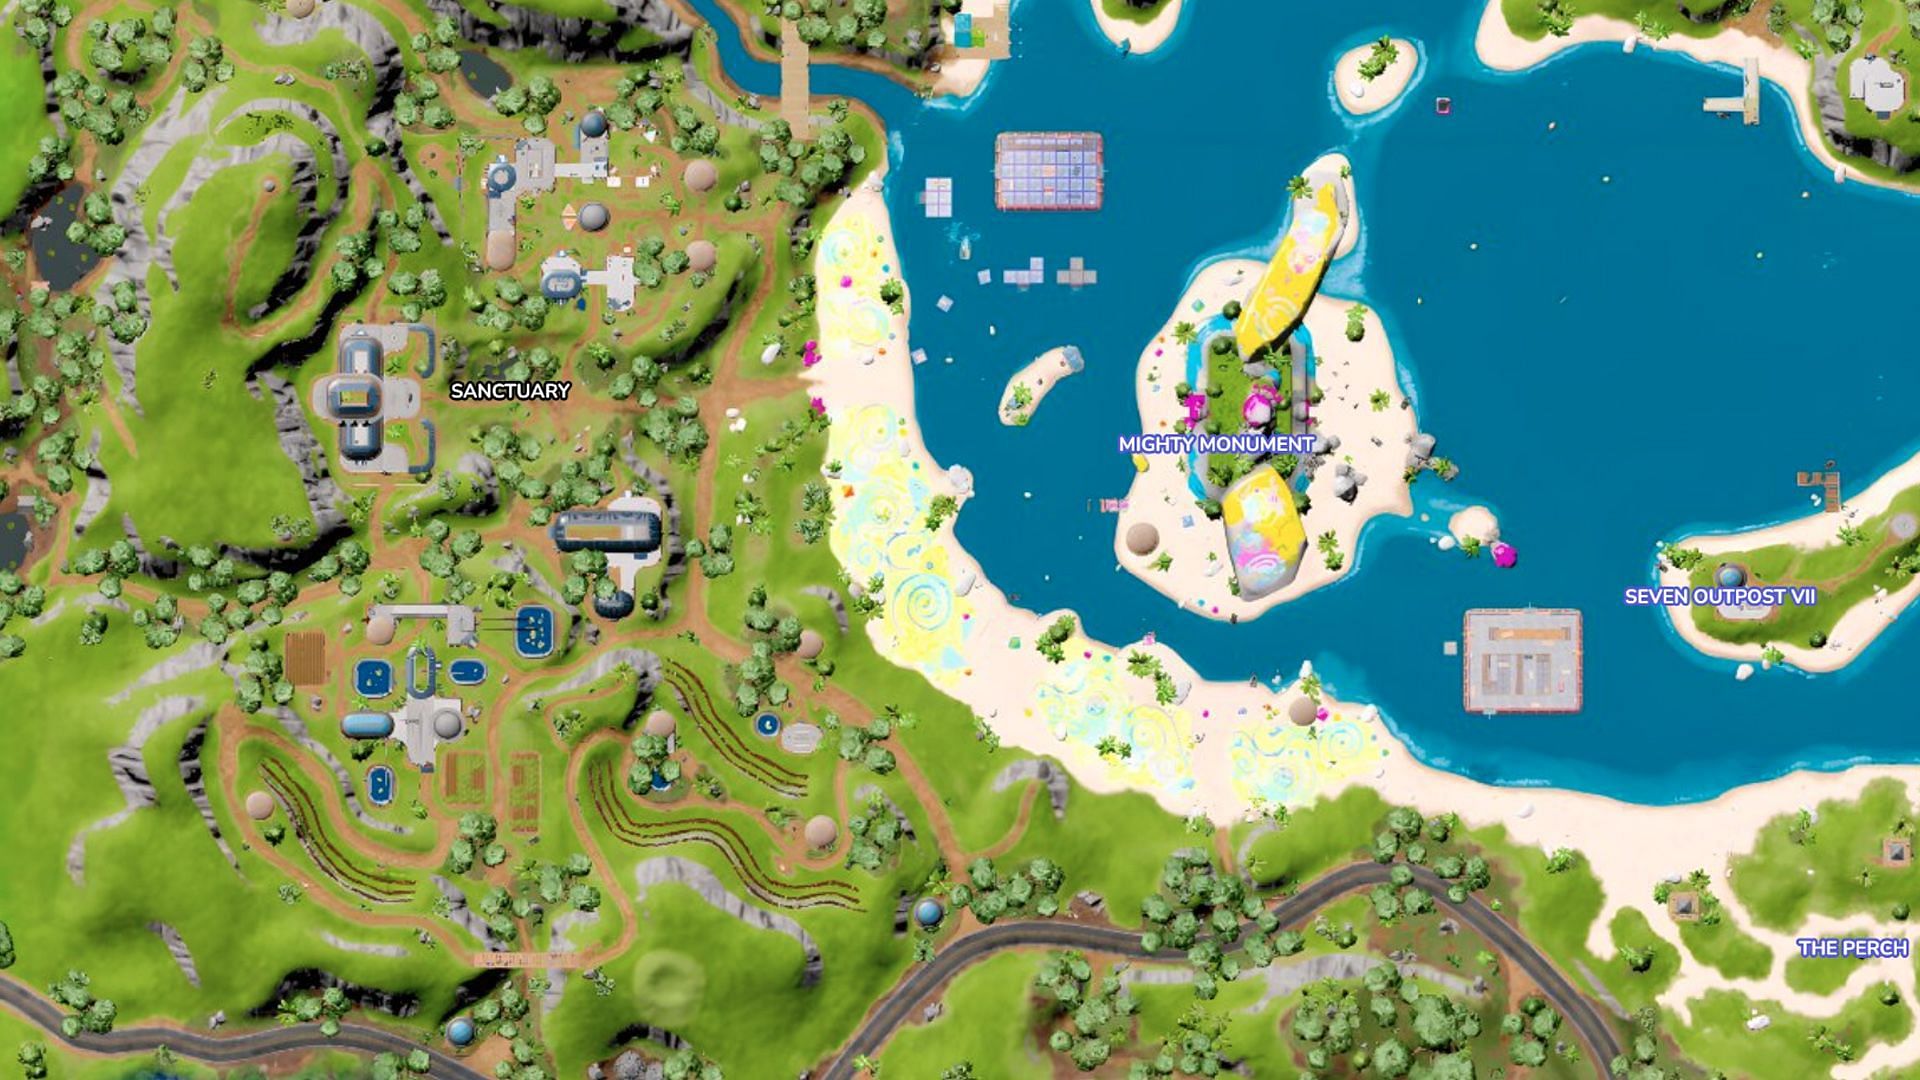 Gamers can complete the Fortnite Summer challenge easily by visiting the beach next to The Sanctuary (Image via Epic Games)